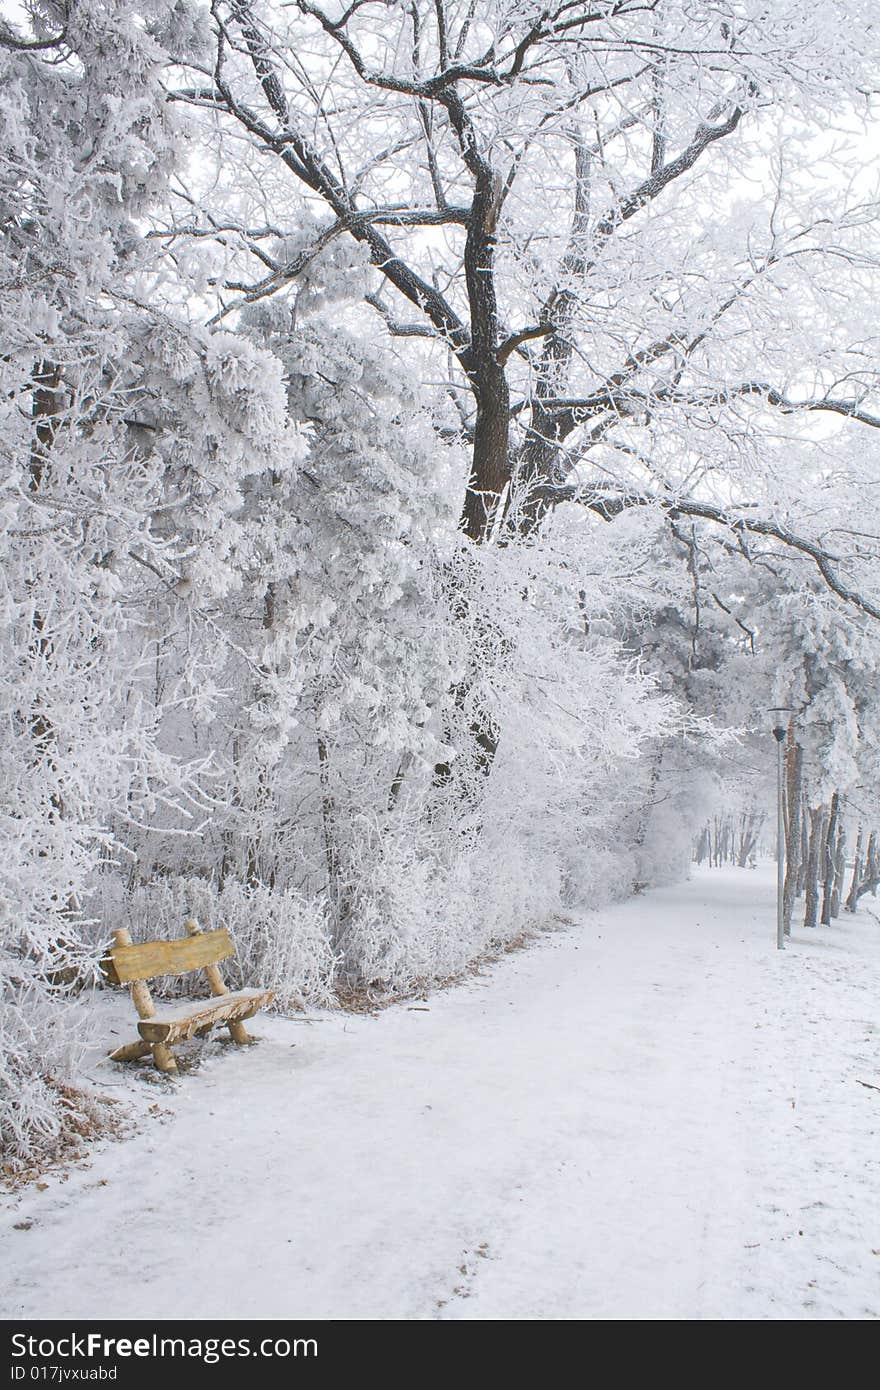 Park alley and bench in winter. Park alley and bench in winter